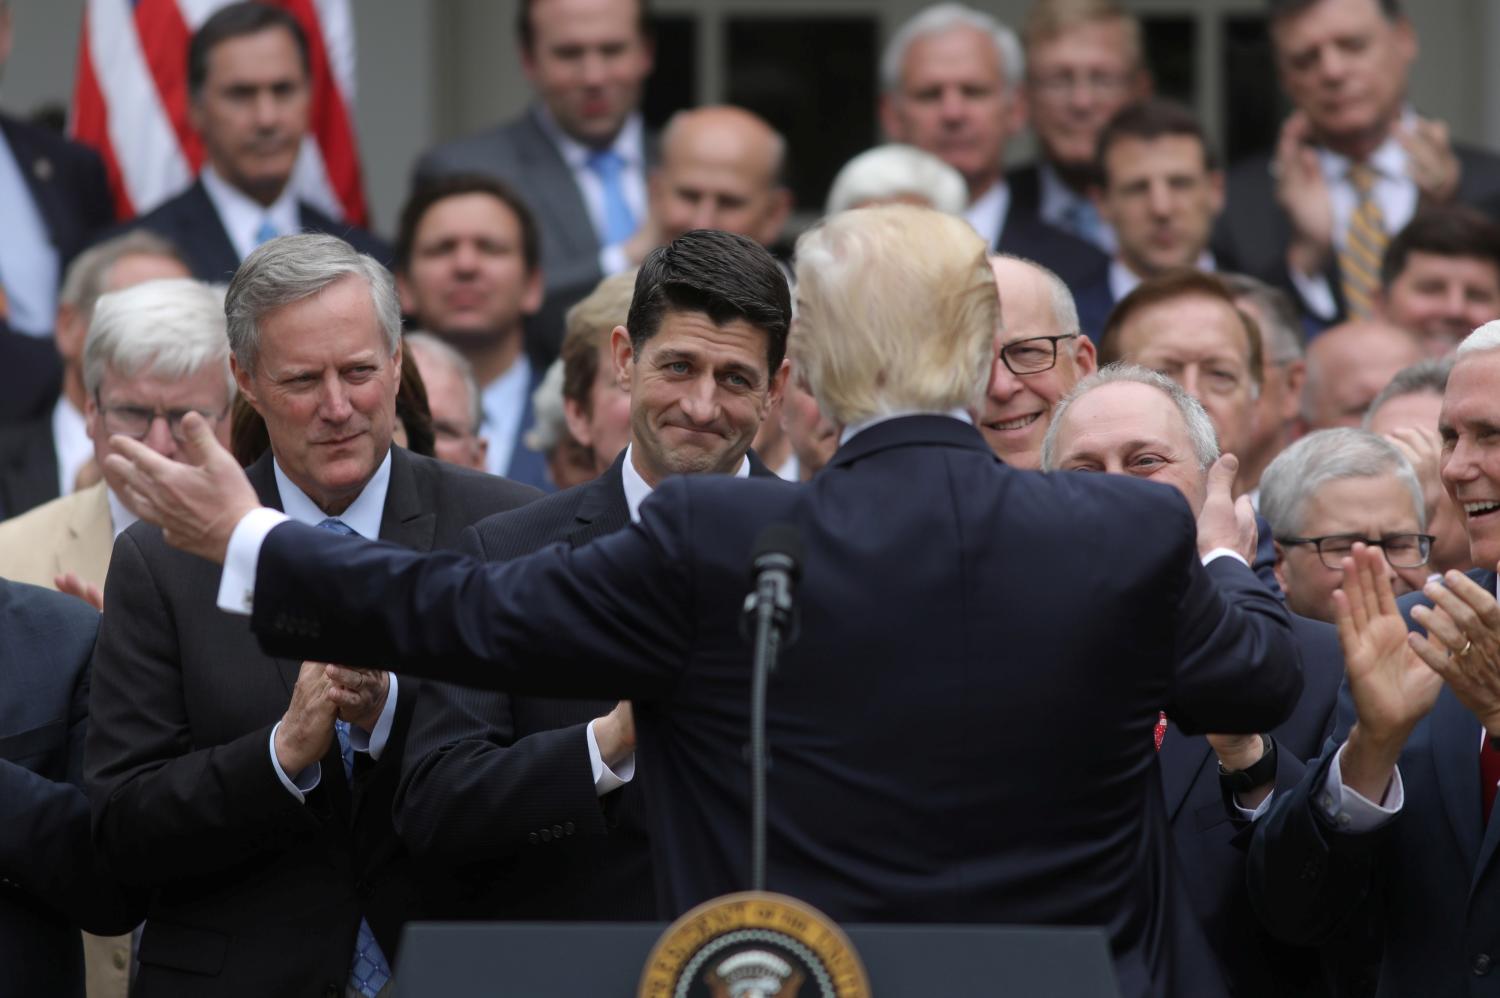 U.S. President Donald Trump (C) turns to House Speaker Paul Ryan (3rdL) as he gathers with Congressional Republicans in the Rose Garden of the White House after the House of Representatives approved the American Healthcare Act, to repeal major parts of Obamacare and replace it with the Republican healthcare plan